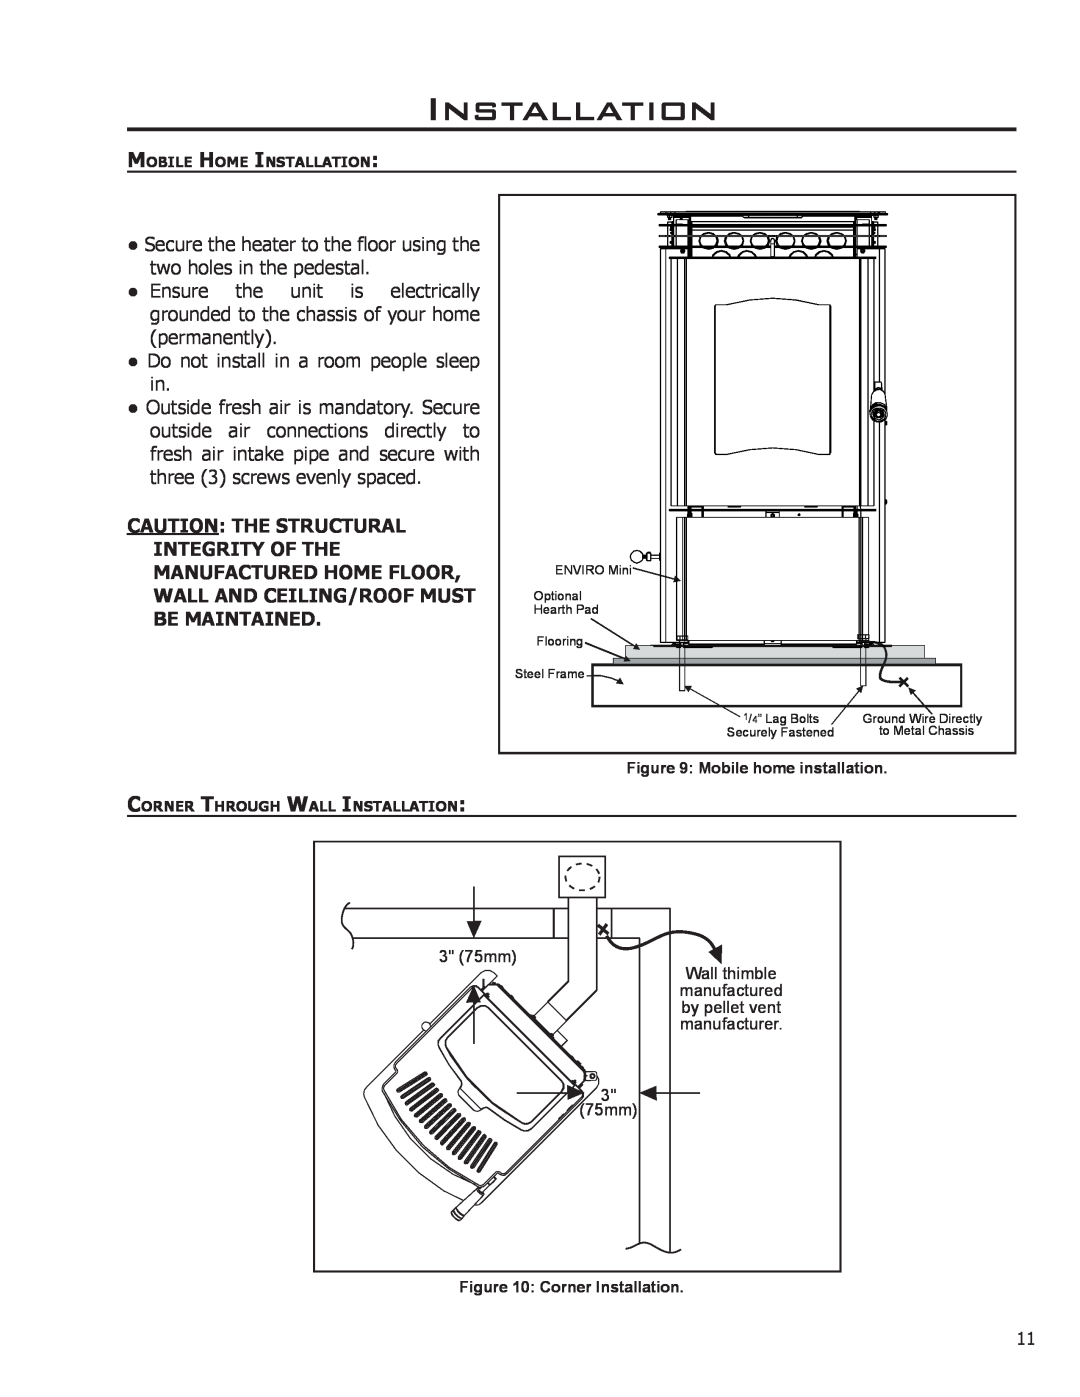 Enviro C-11150 technical manual Installation, Secure the heater to the floor using the two holes in the pedestal 